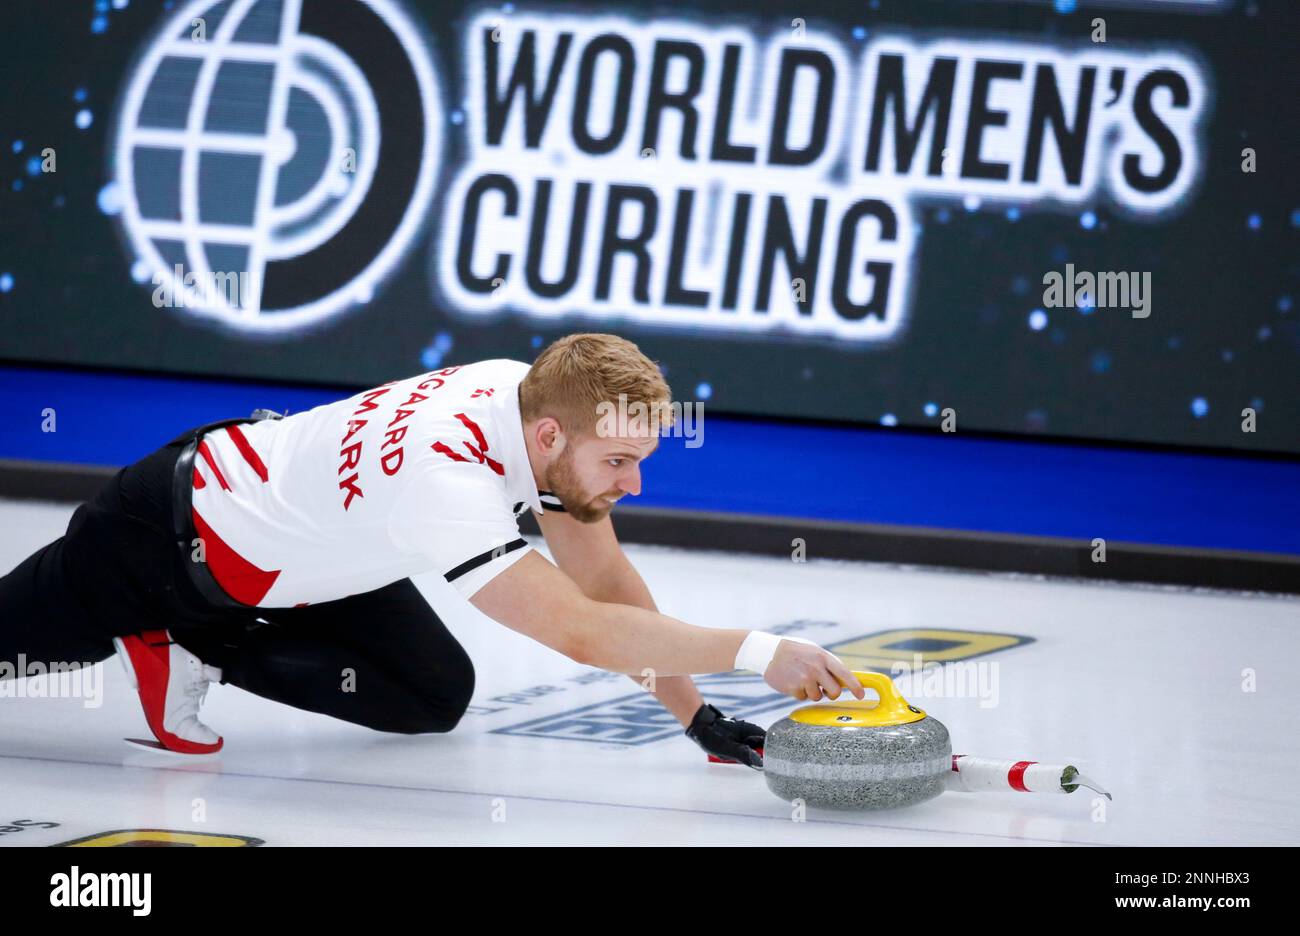 Denmark skip Mads Norgaard makes a shot against Germany at the mens World Curling Championships in Calgary, Alberta, Tuesday, April 6, 2021